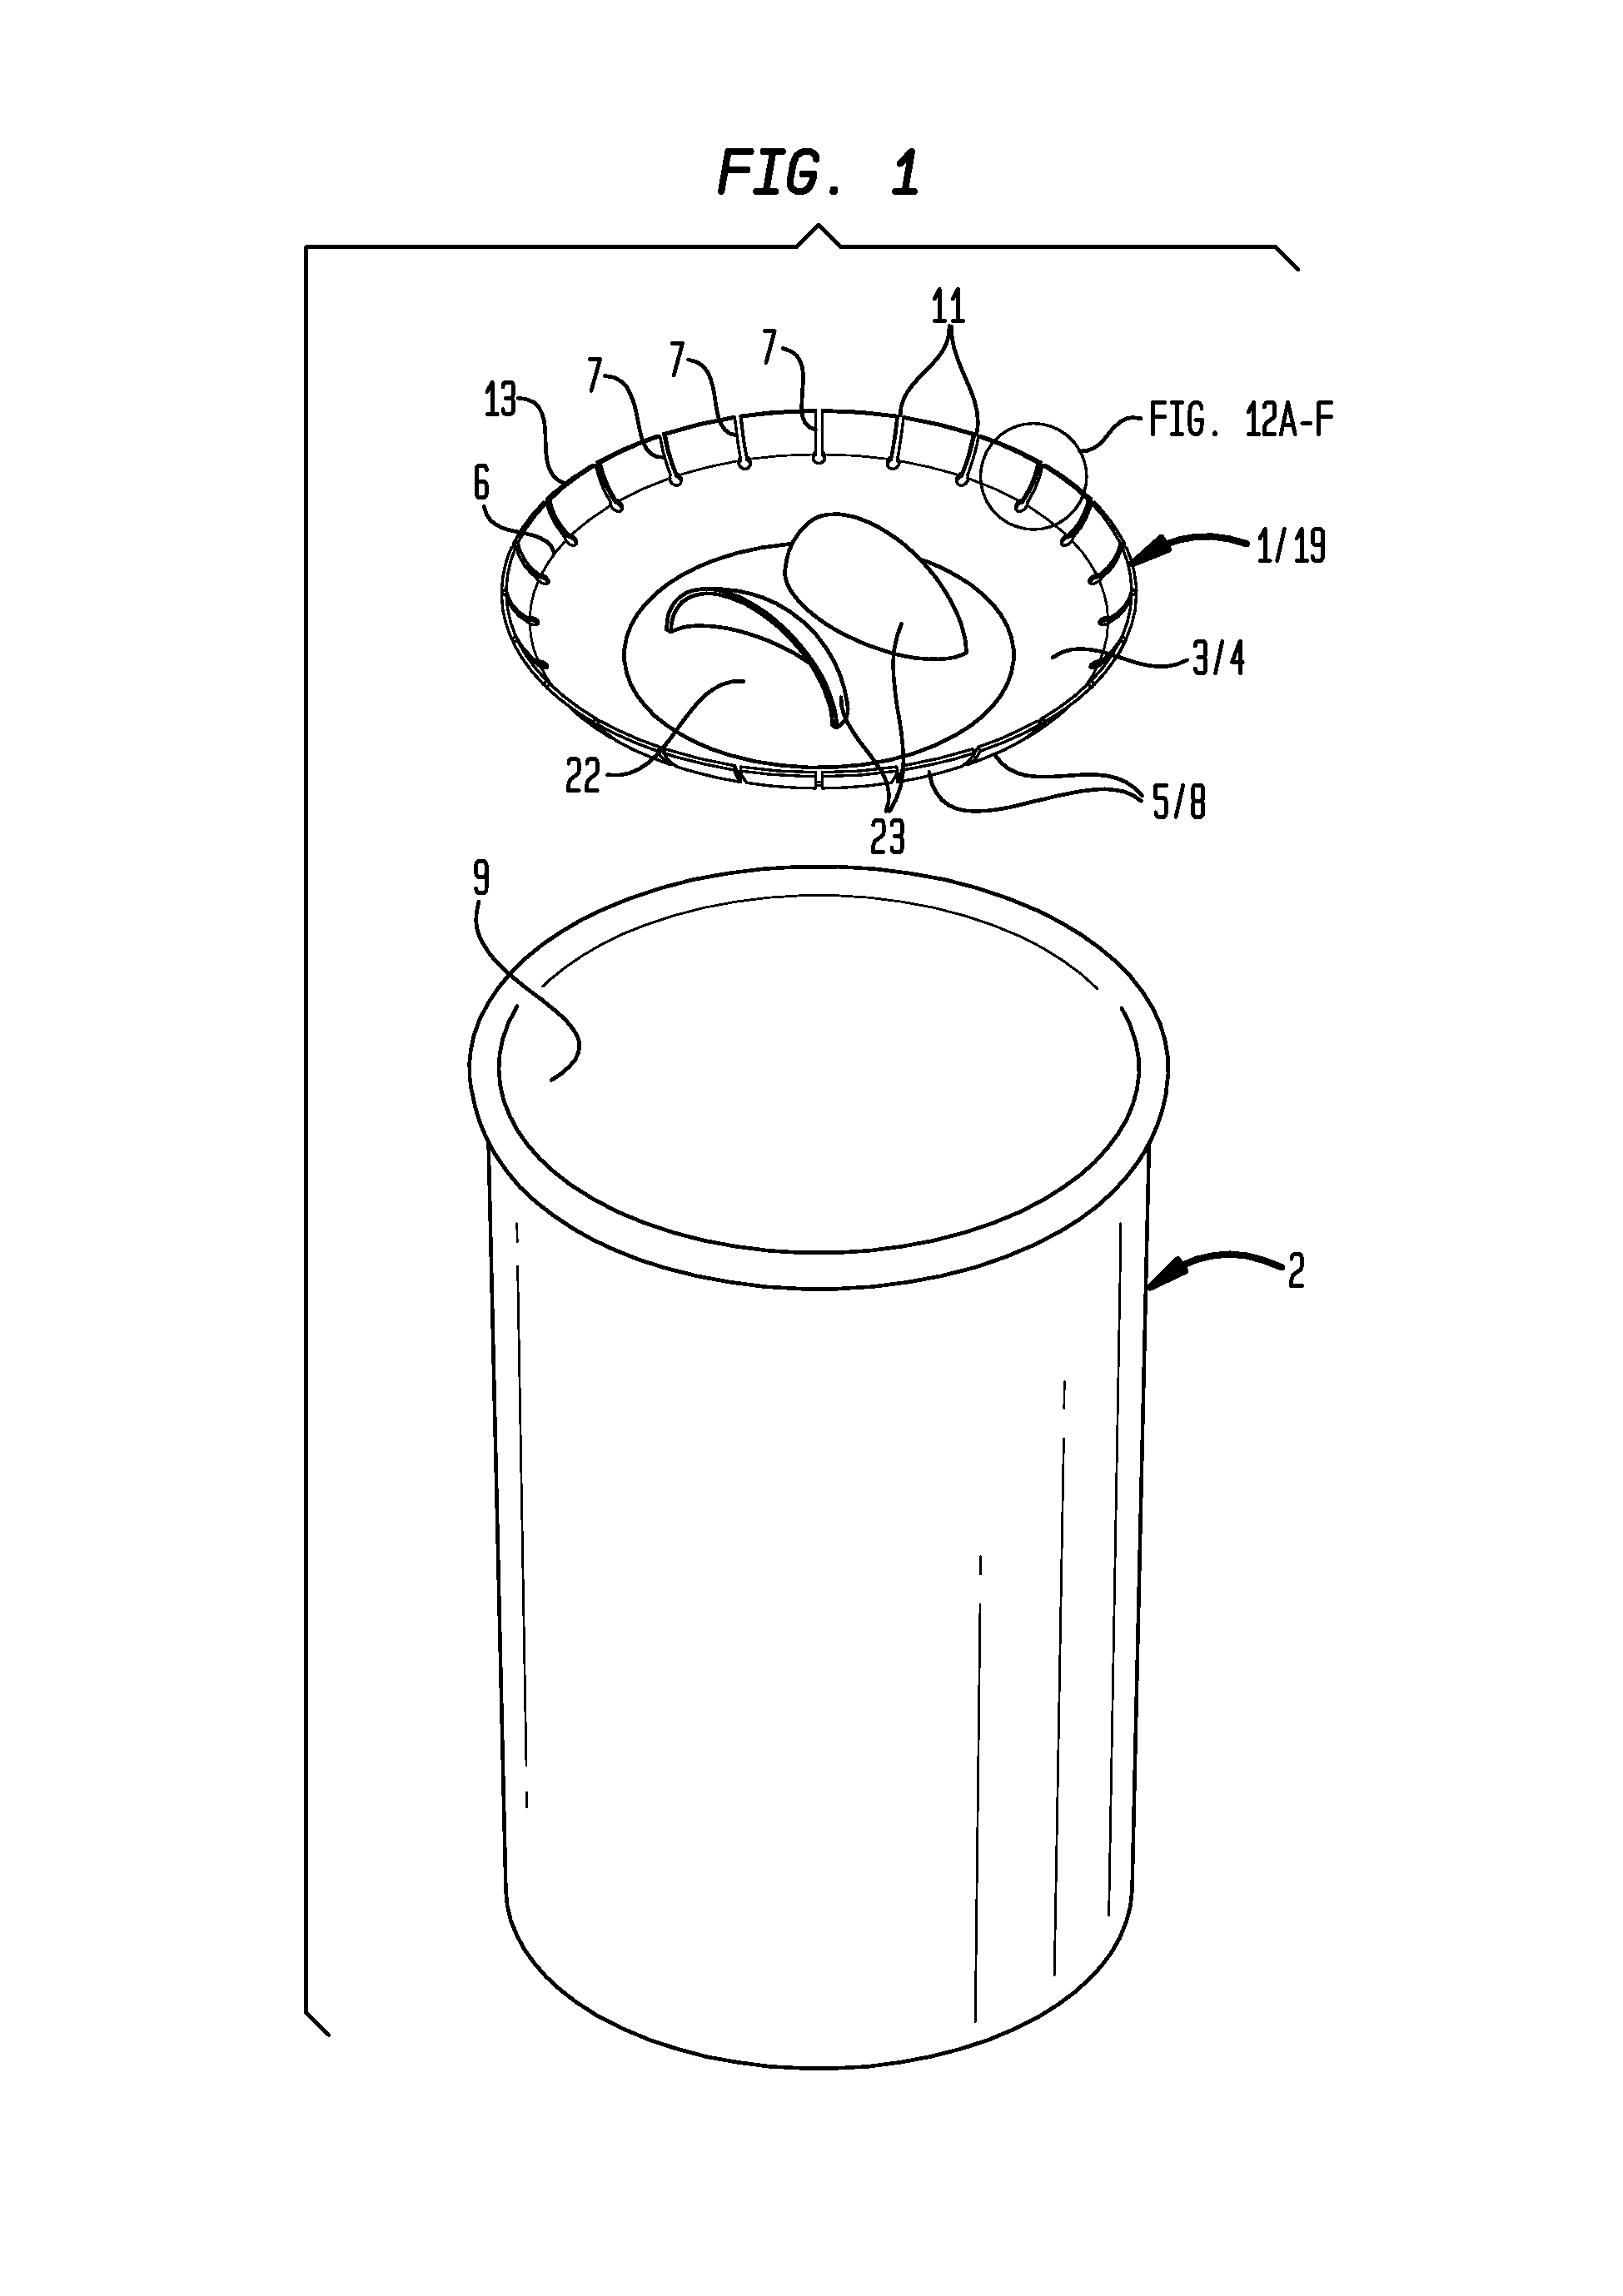 Fluid flow control device for a container